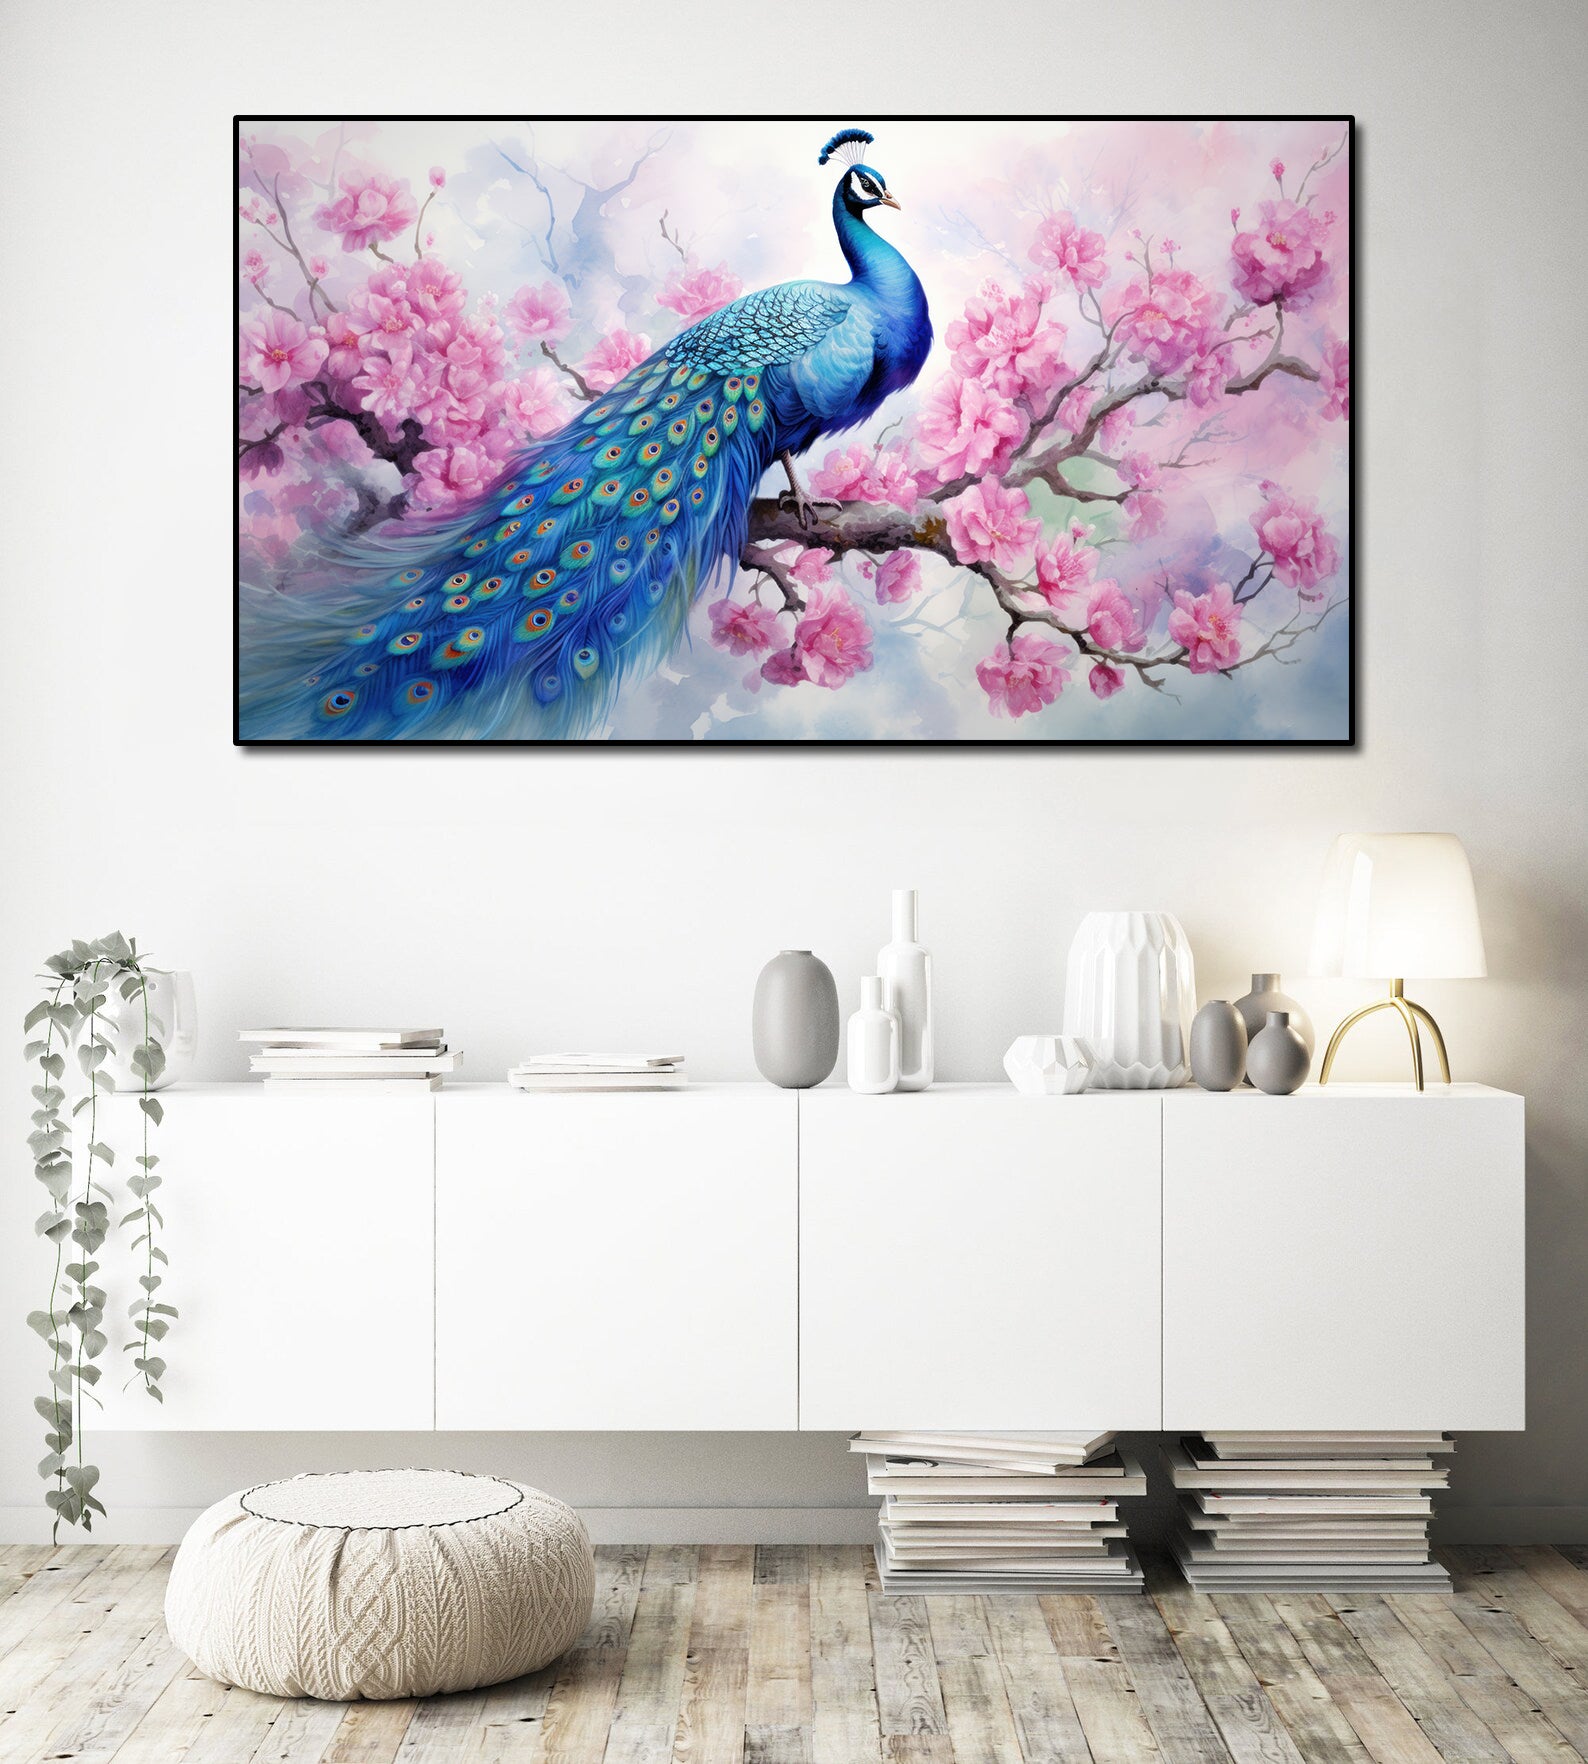 Copy of Framed 1 Panel - Peacock